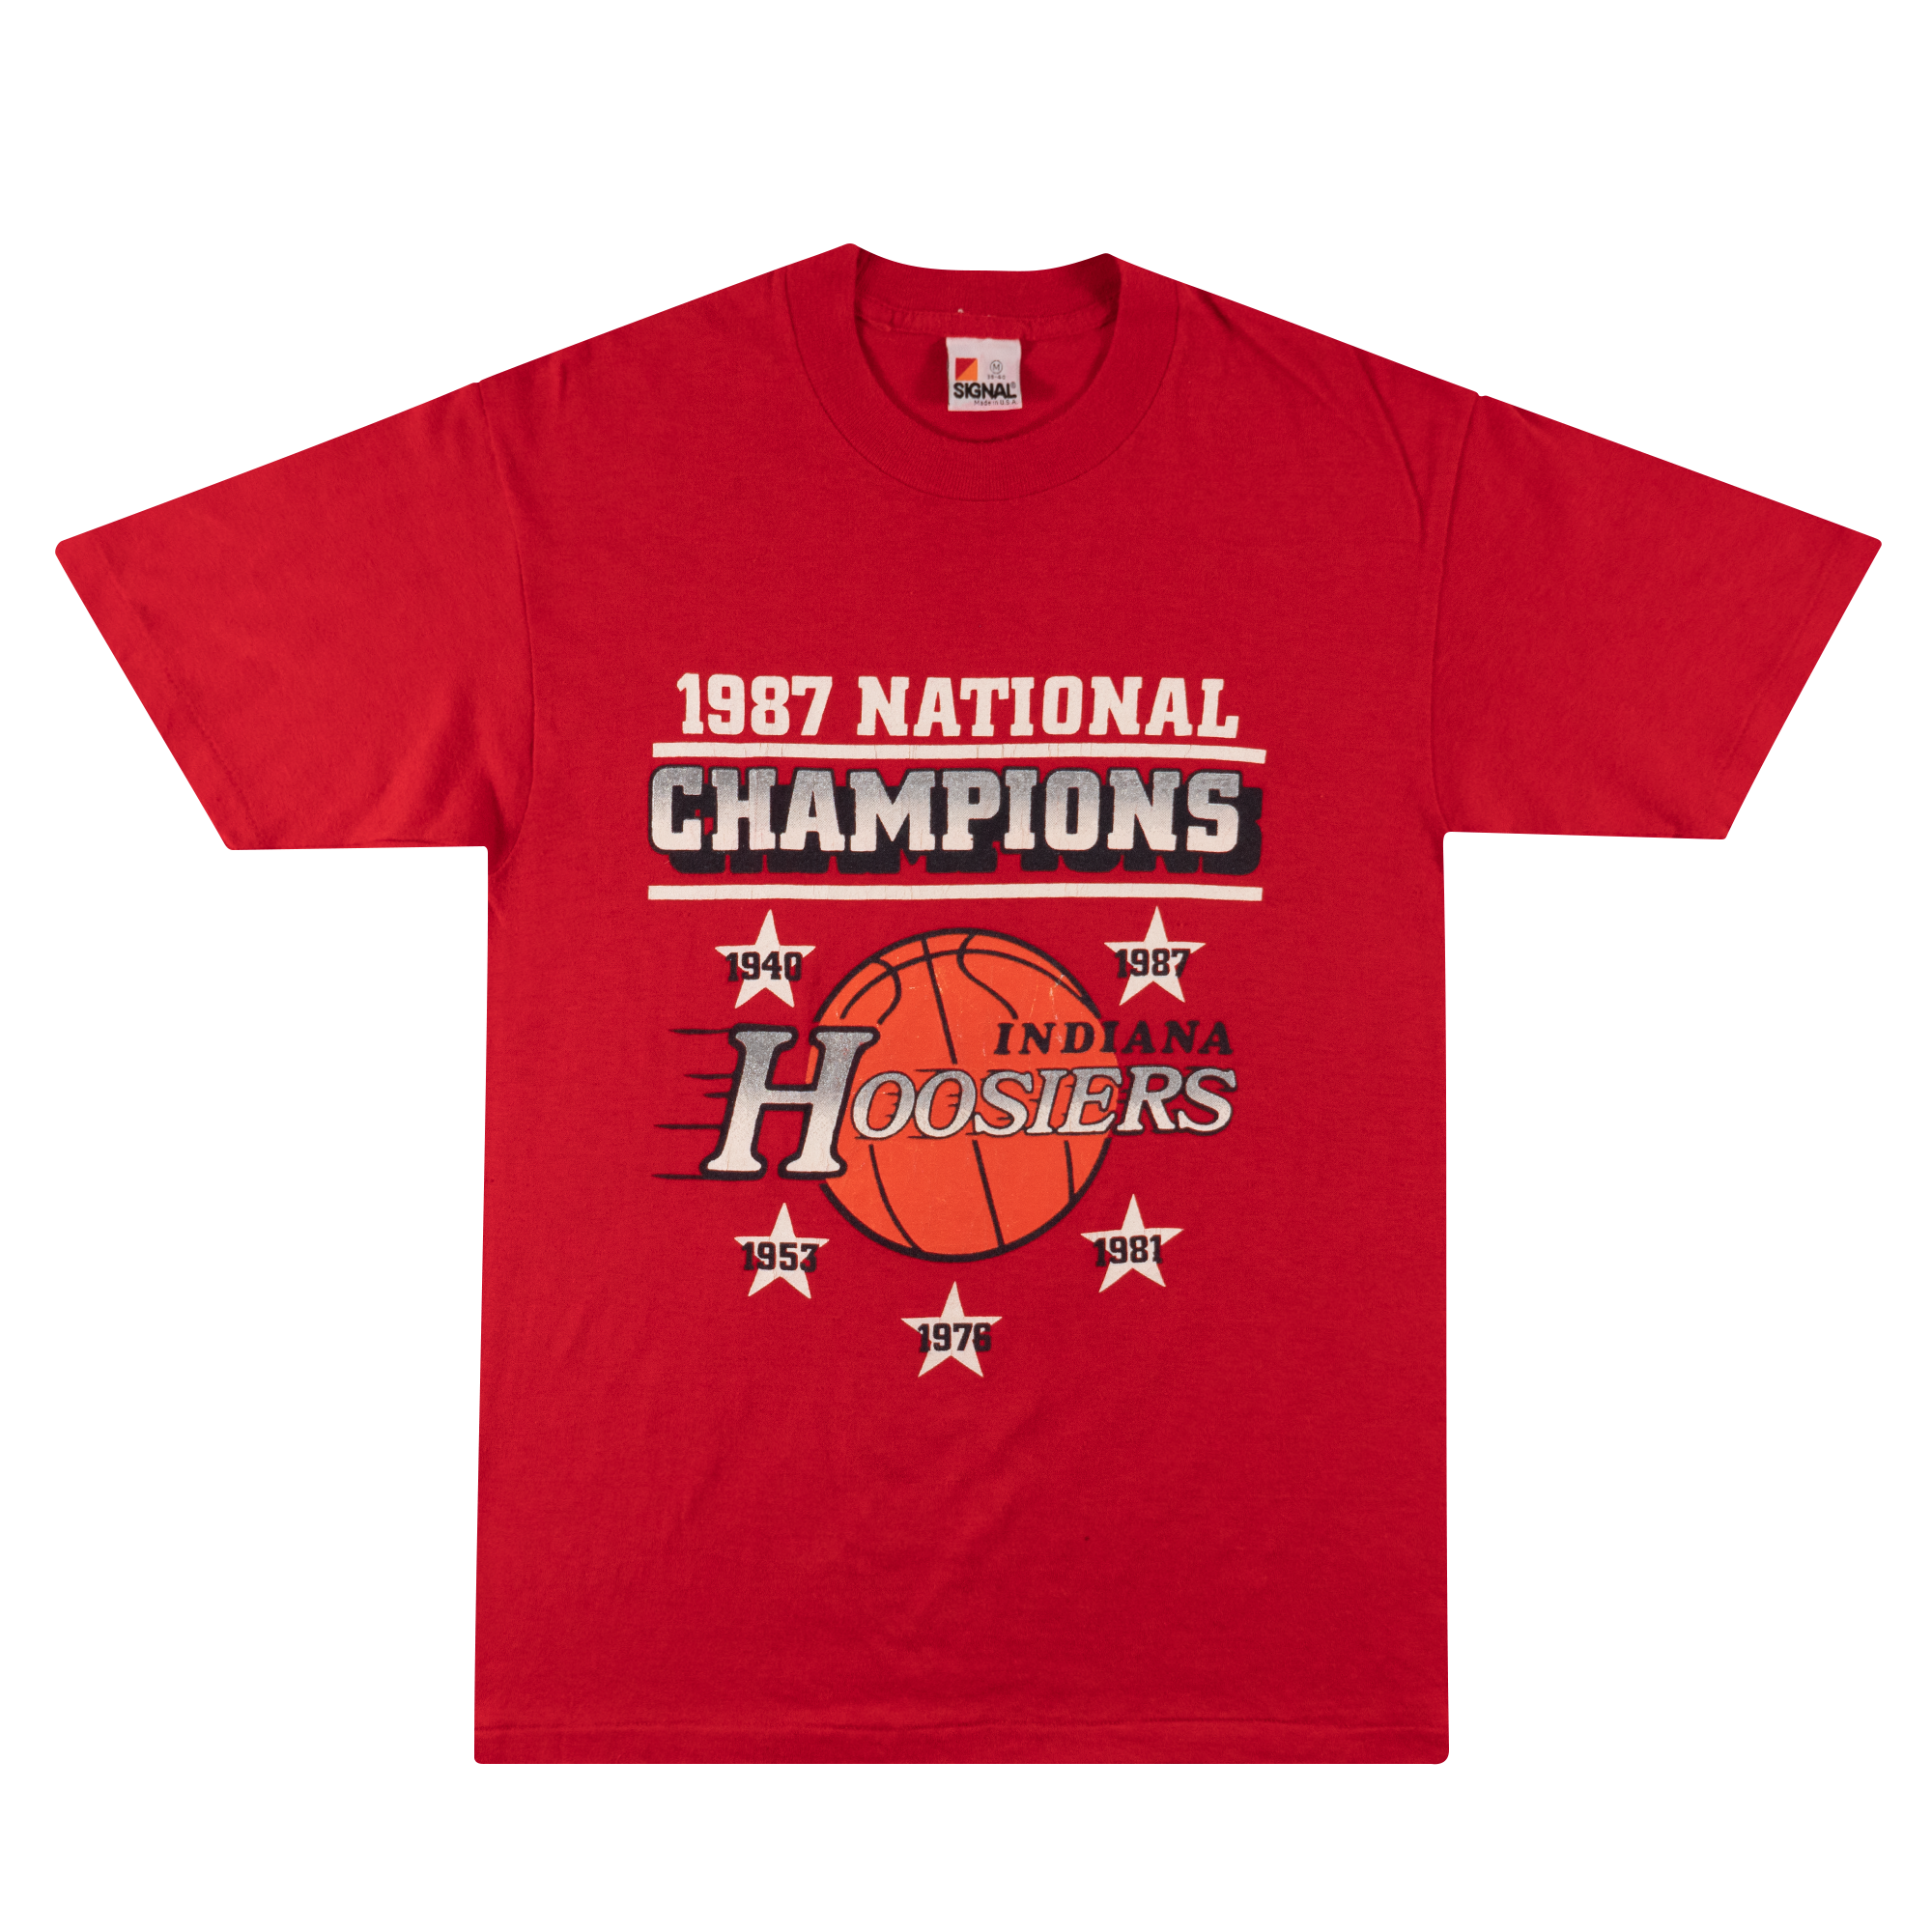 Indiana Hoosiers National Champions 1987 Tee Red-PLUS